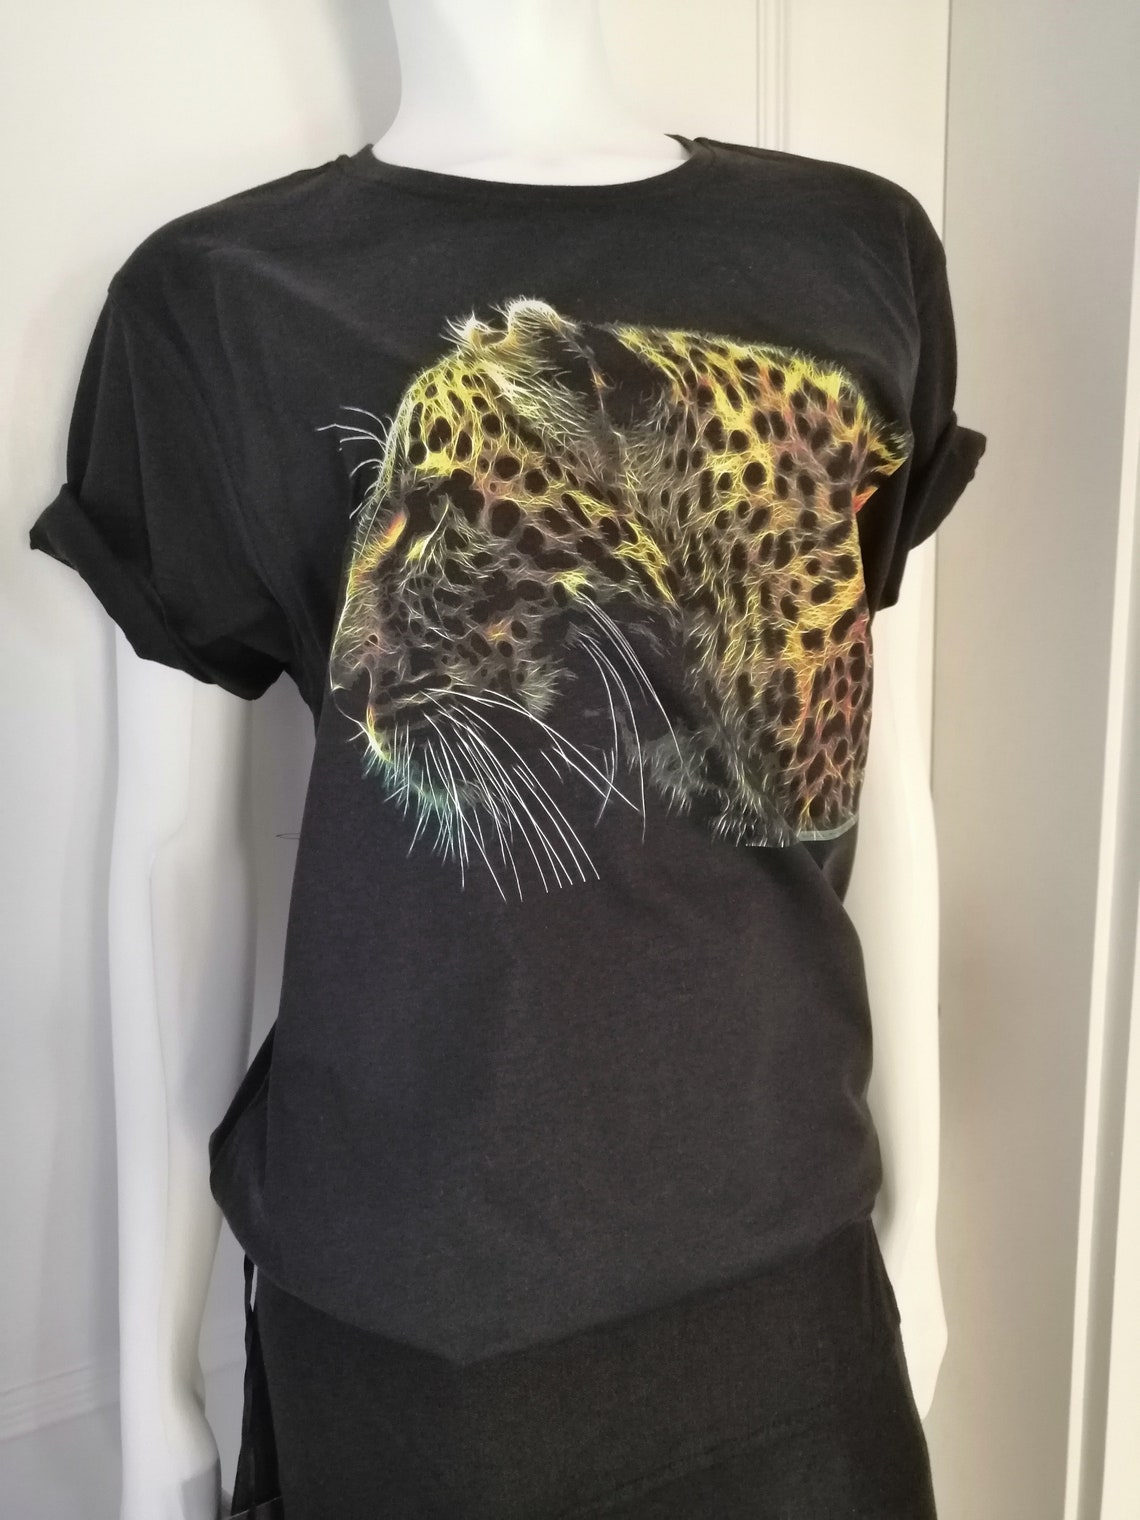 New Unisex Black 100% Cotton T-shirt Leopard Printed in - Etsy